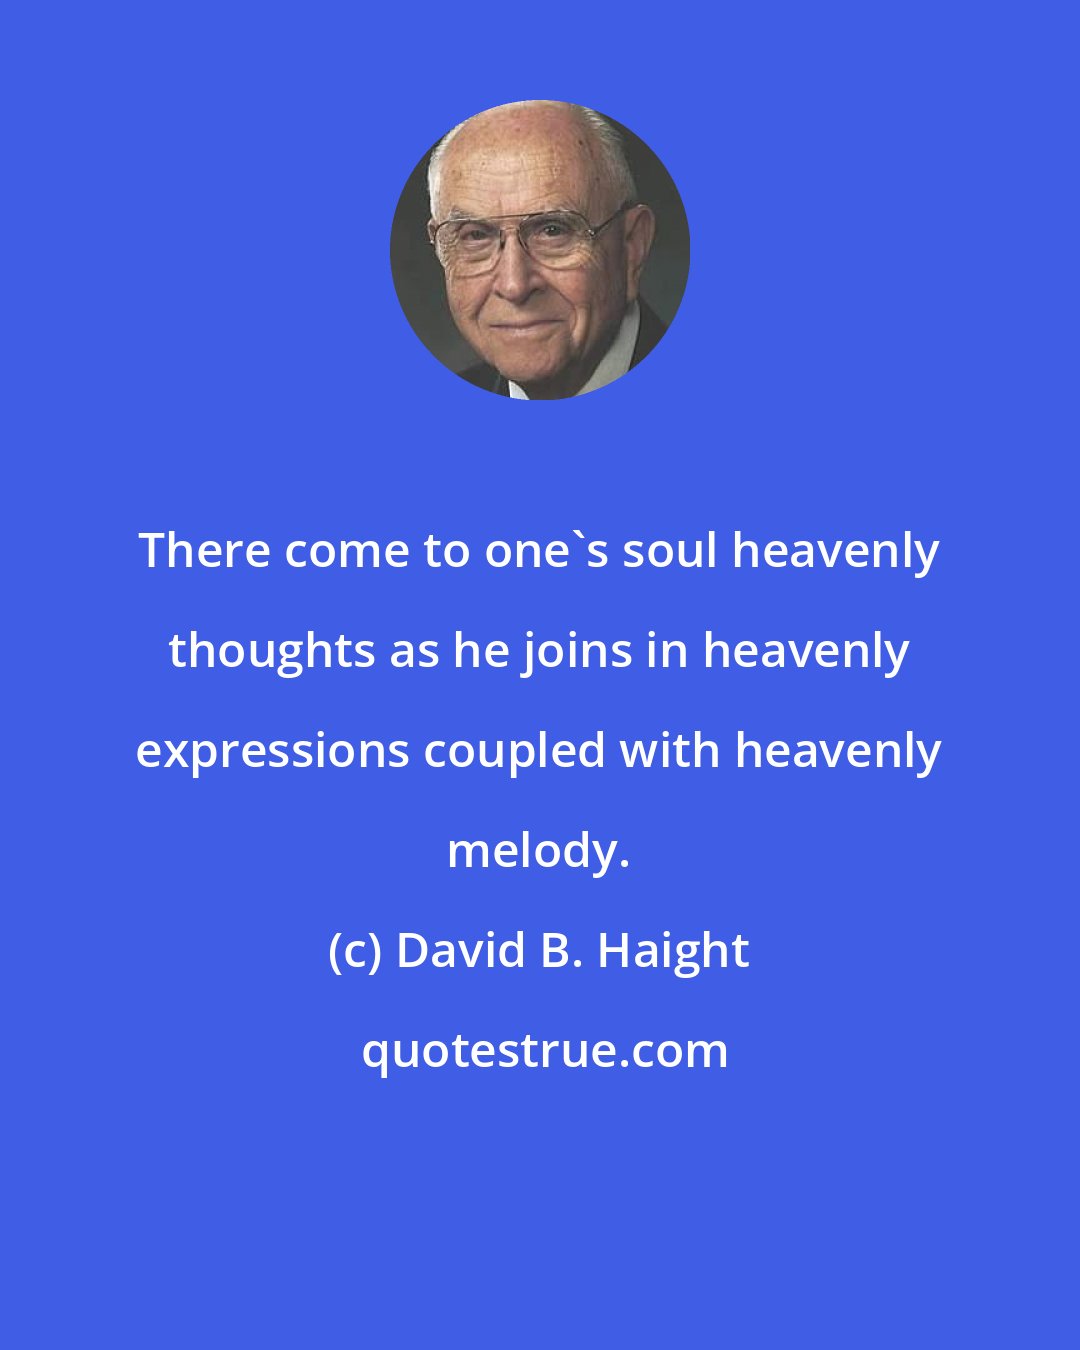 David B. Haight: There come to one's soul heavenly thoughts as he joins in heavenly expressions coupled with heavenly melody.